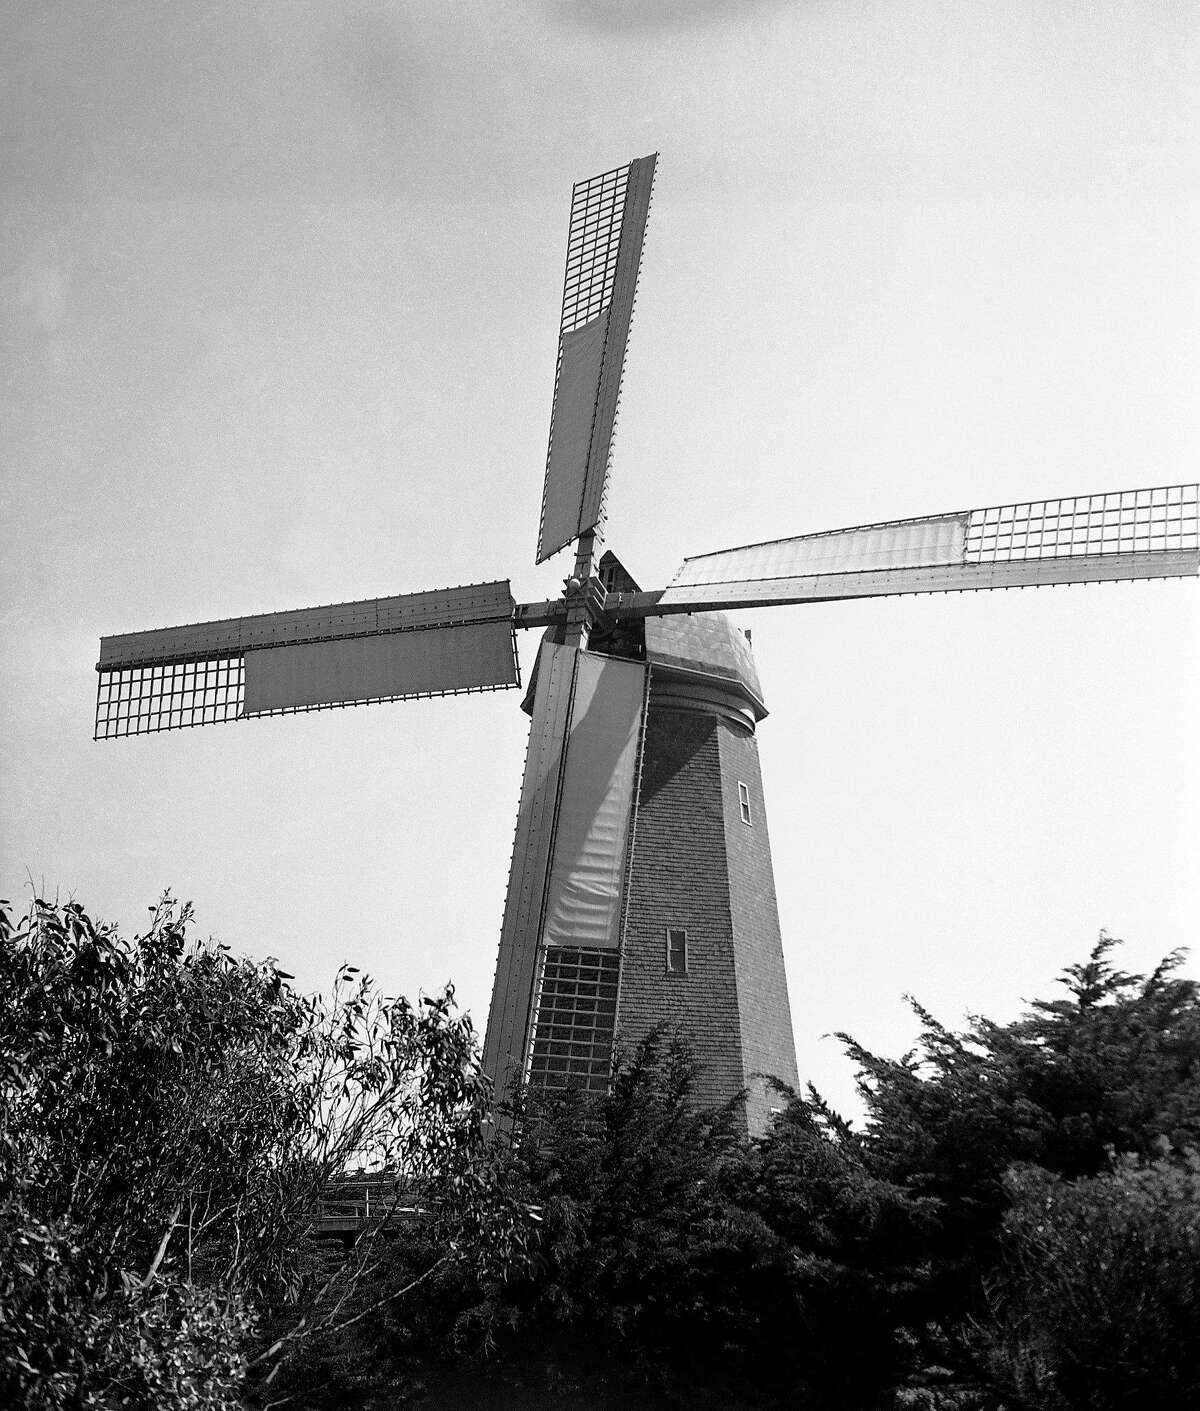 In this May 30, 1936 file photo, the historic landmark Murphy Windmill stands in Golden Gate Park in San Francisco. The windmill's 68-ton copper dome was placed back on top of the structure on Monday, Sept. 12, 2011, after undergoing nearly a decade of restoration.